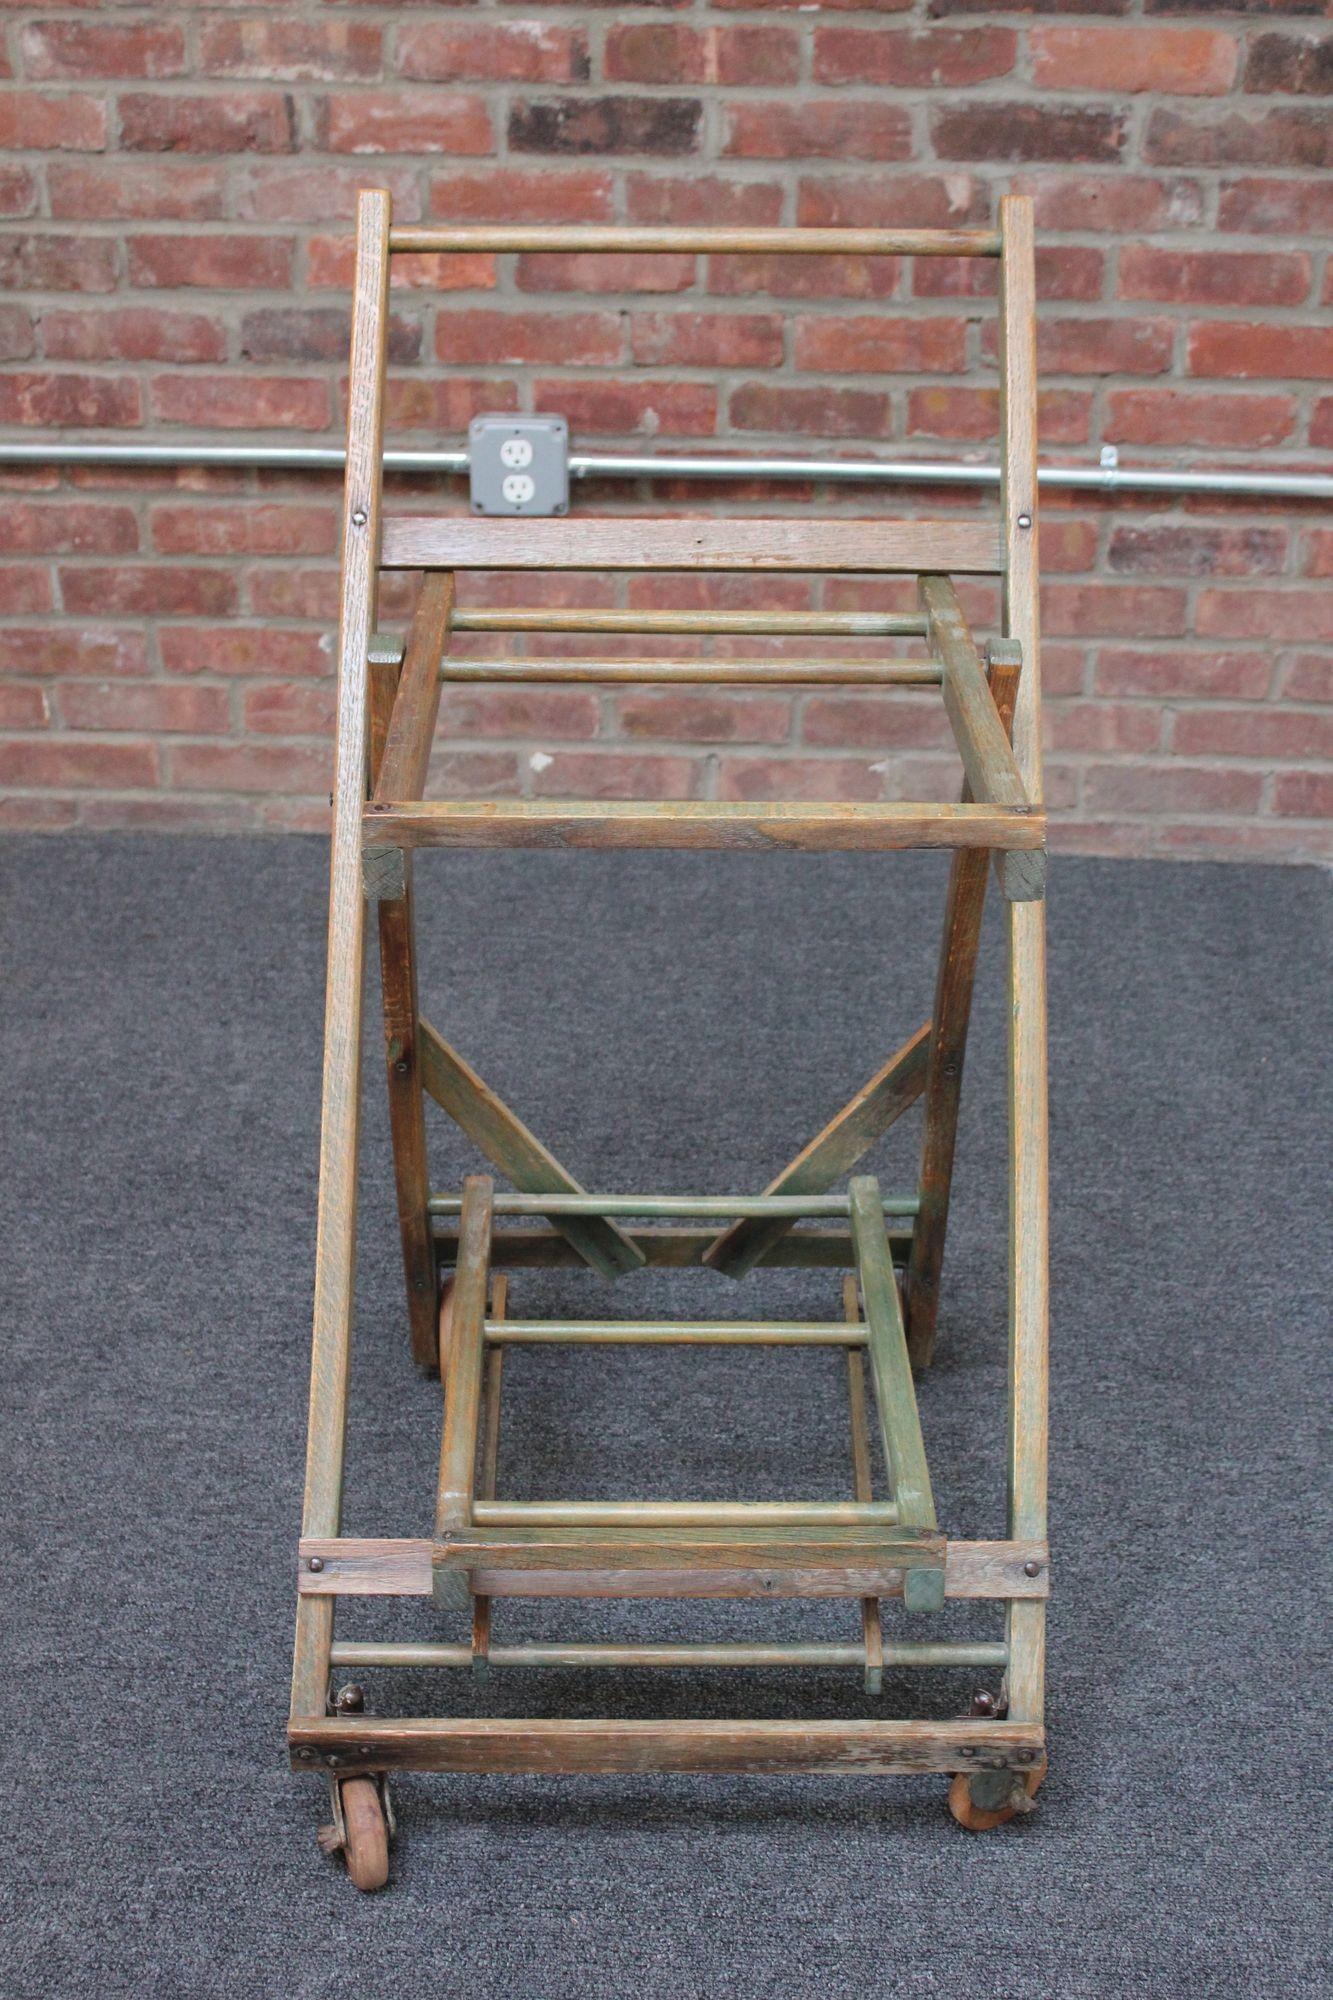 Charming oak collapsible shopping cart on caster wheels (ca. late 1930s/early 1940s, USA).
This early version, inspired by a folding chair, was developed by Sylvan Goldman in 1936 as a solution to the cumbersome shopping basket. It not only took up